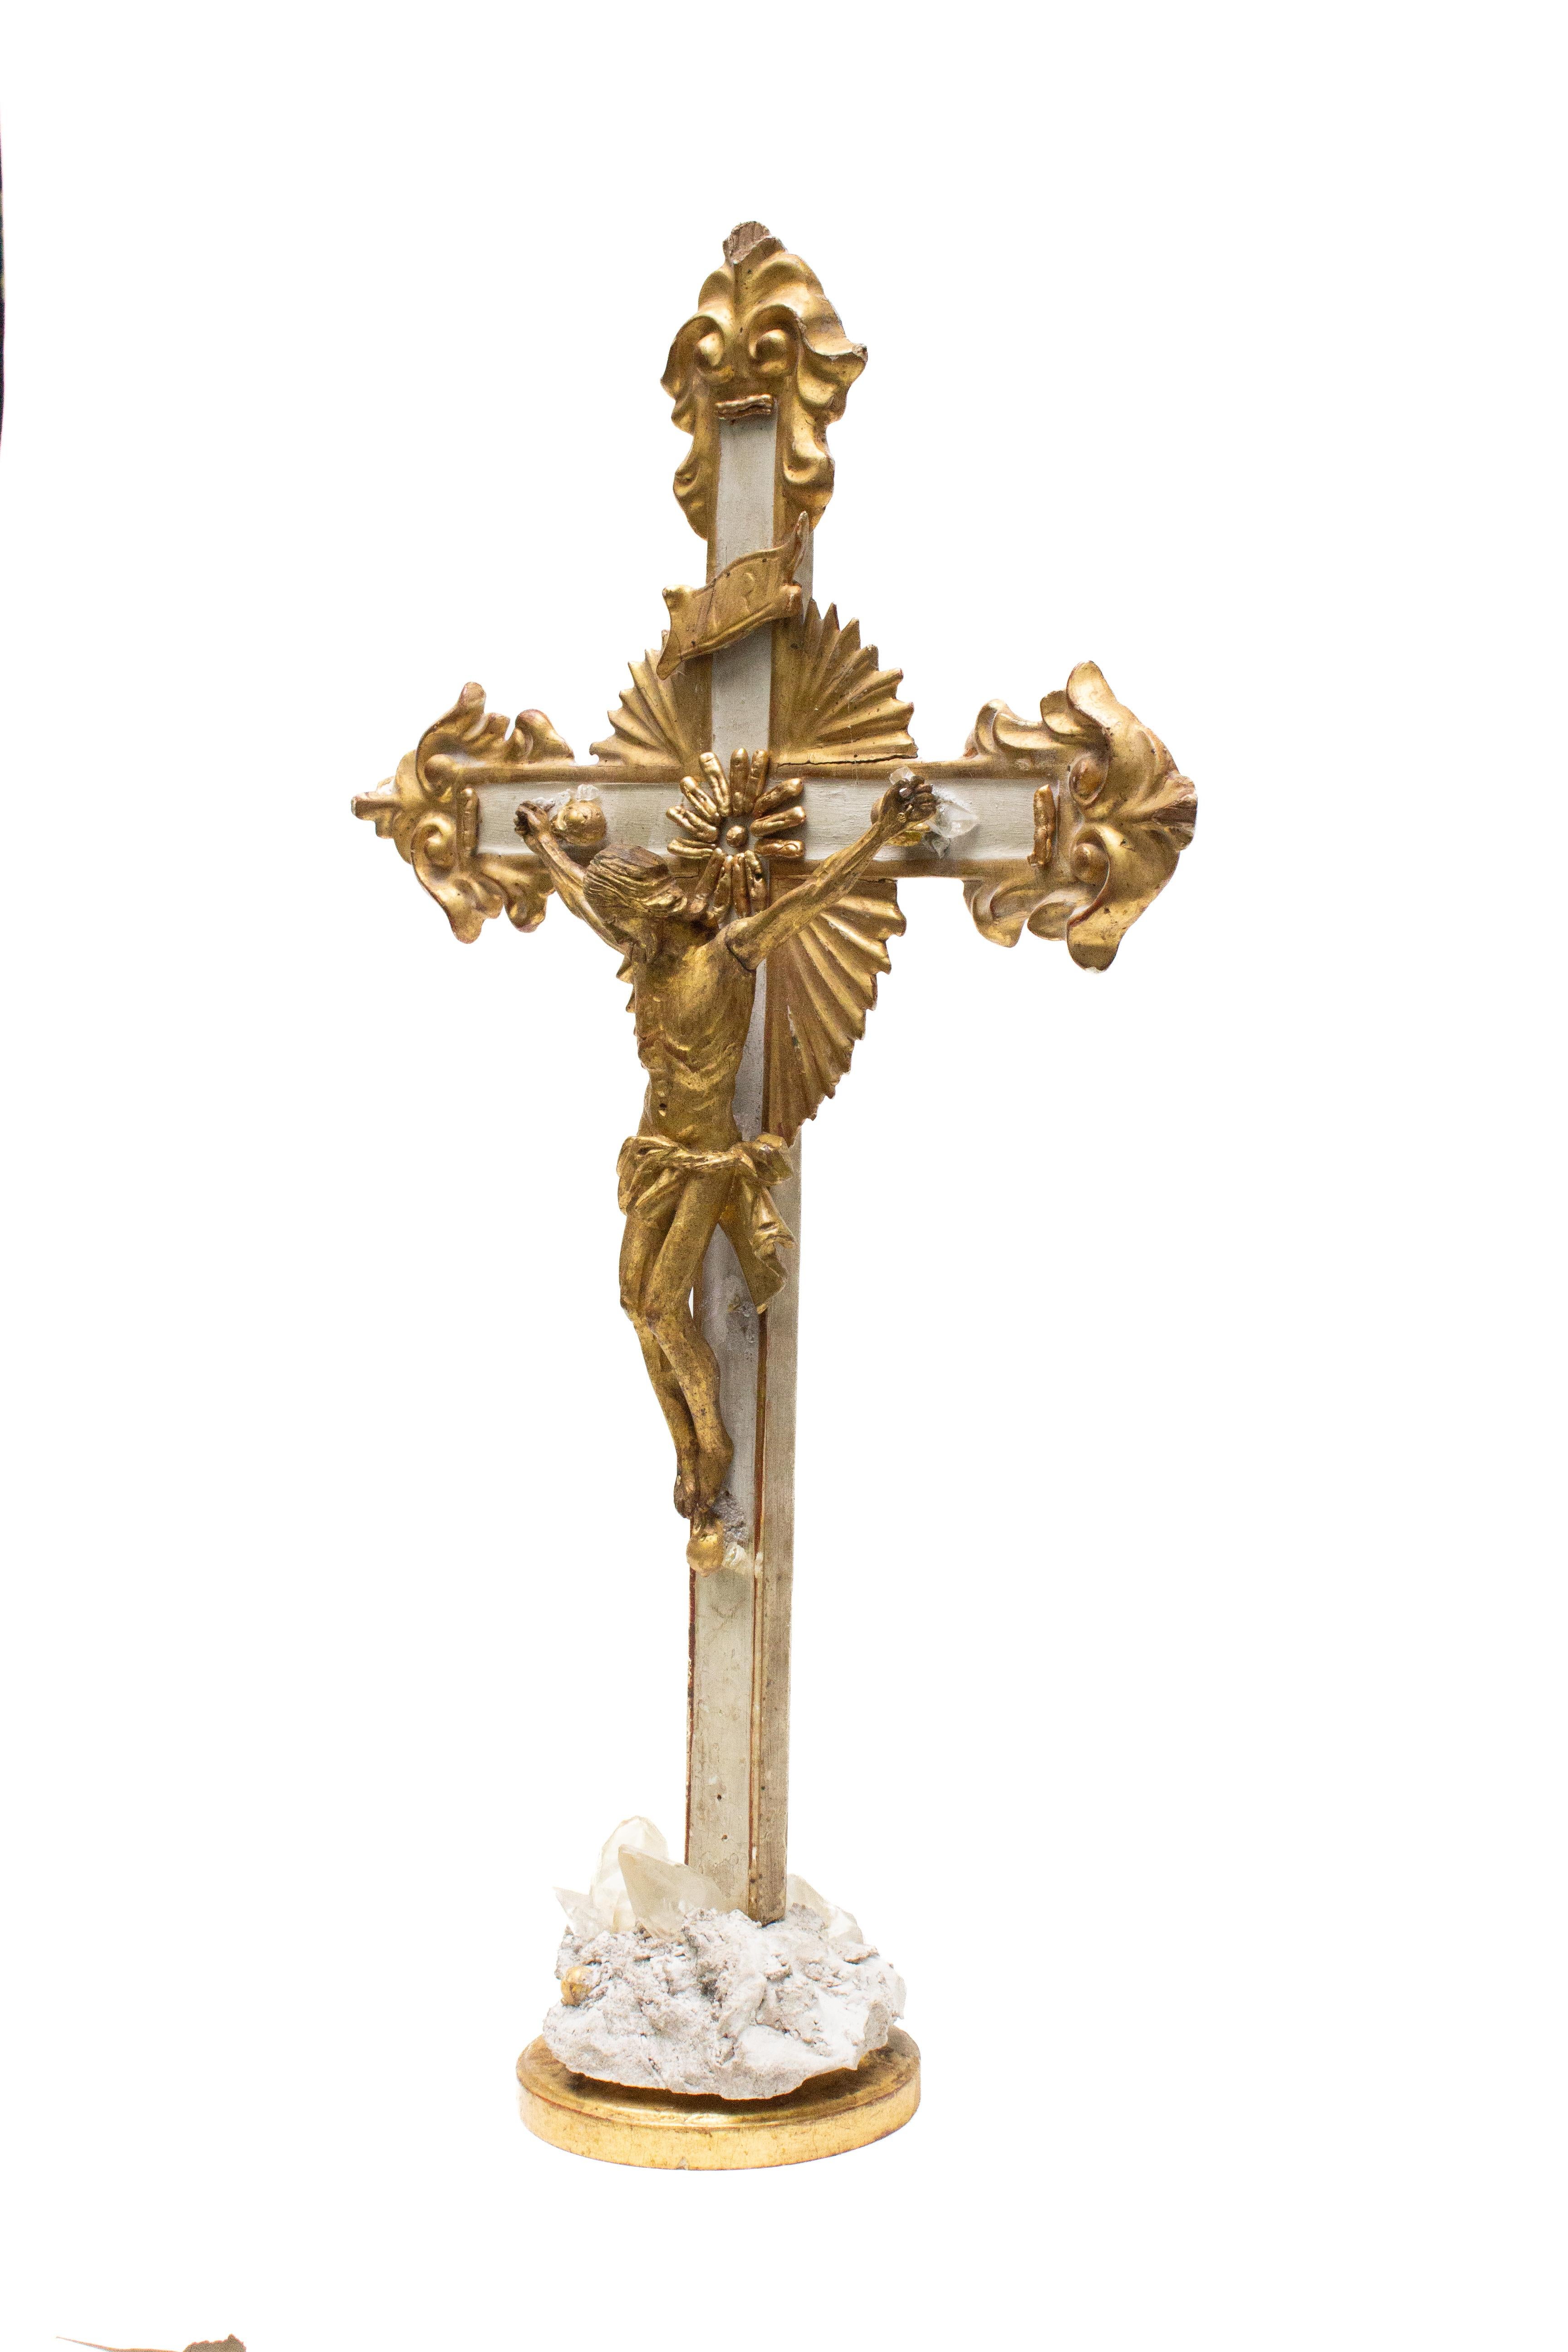 Sculptural 18th Century Italian Gilded Crucifix with Calcite Crystals In Good Condition For Sale In Dublin, Dalkey